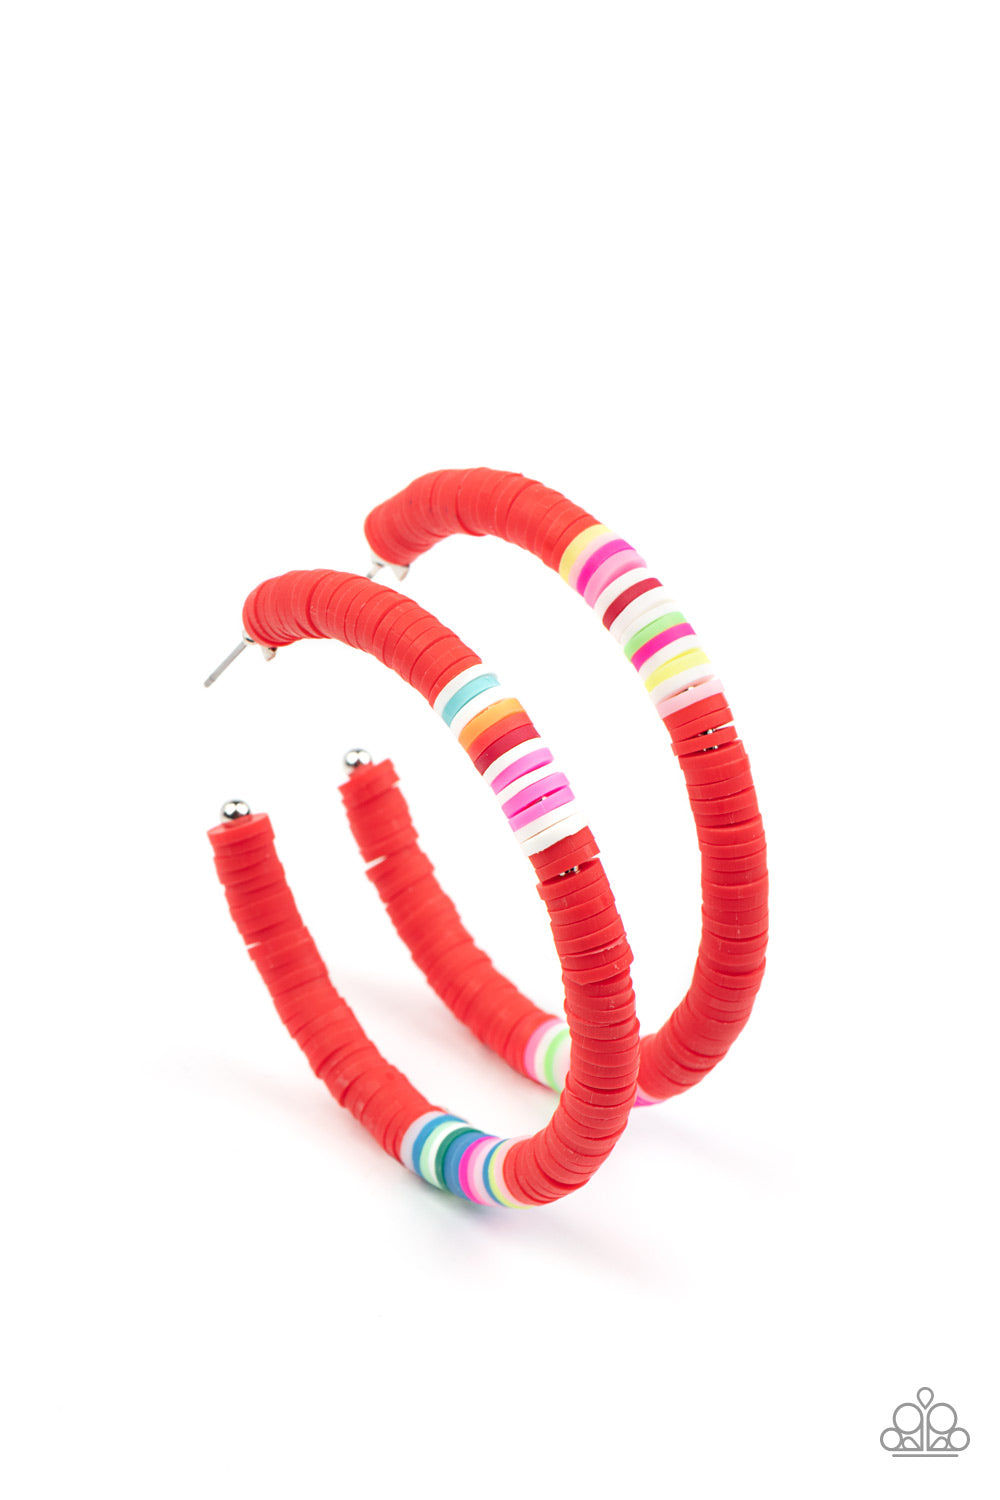 Colorfully Contagious Red Hoop Earring - Paparazzi Accessories  Rubbery red, blue, green, pink, orange, yellow, and white bands are threaded along an oversized silver hoop, creating a courageous pop of color. Earring attaches to a standard post fitting. Hoop measures approximately 2 1/4" in diameter.  Sold as one pair of hoop earrings.